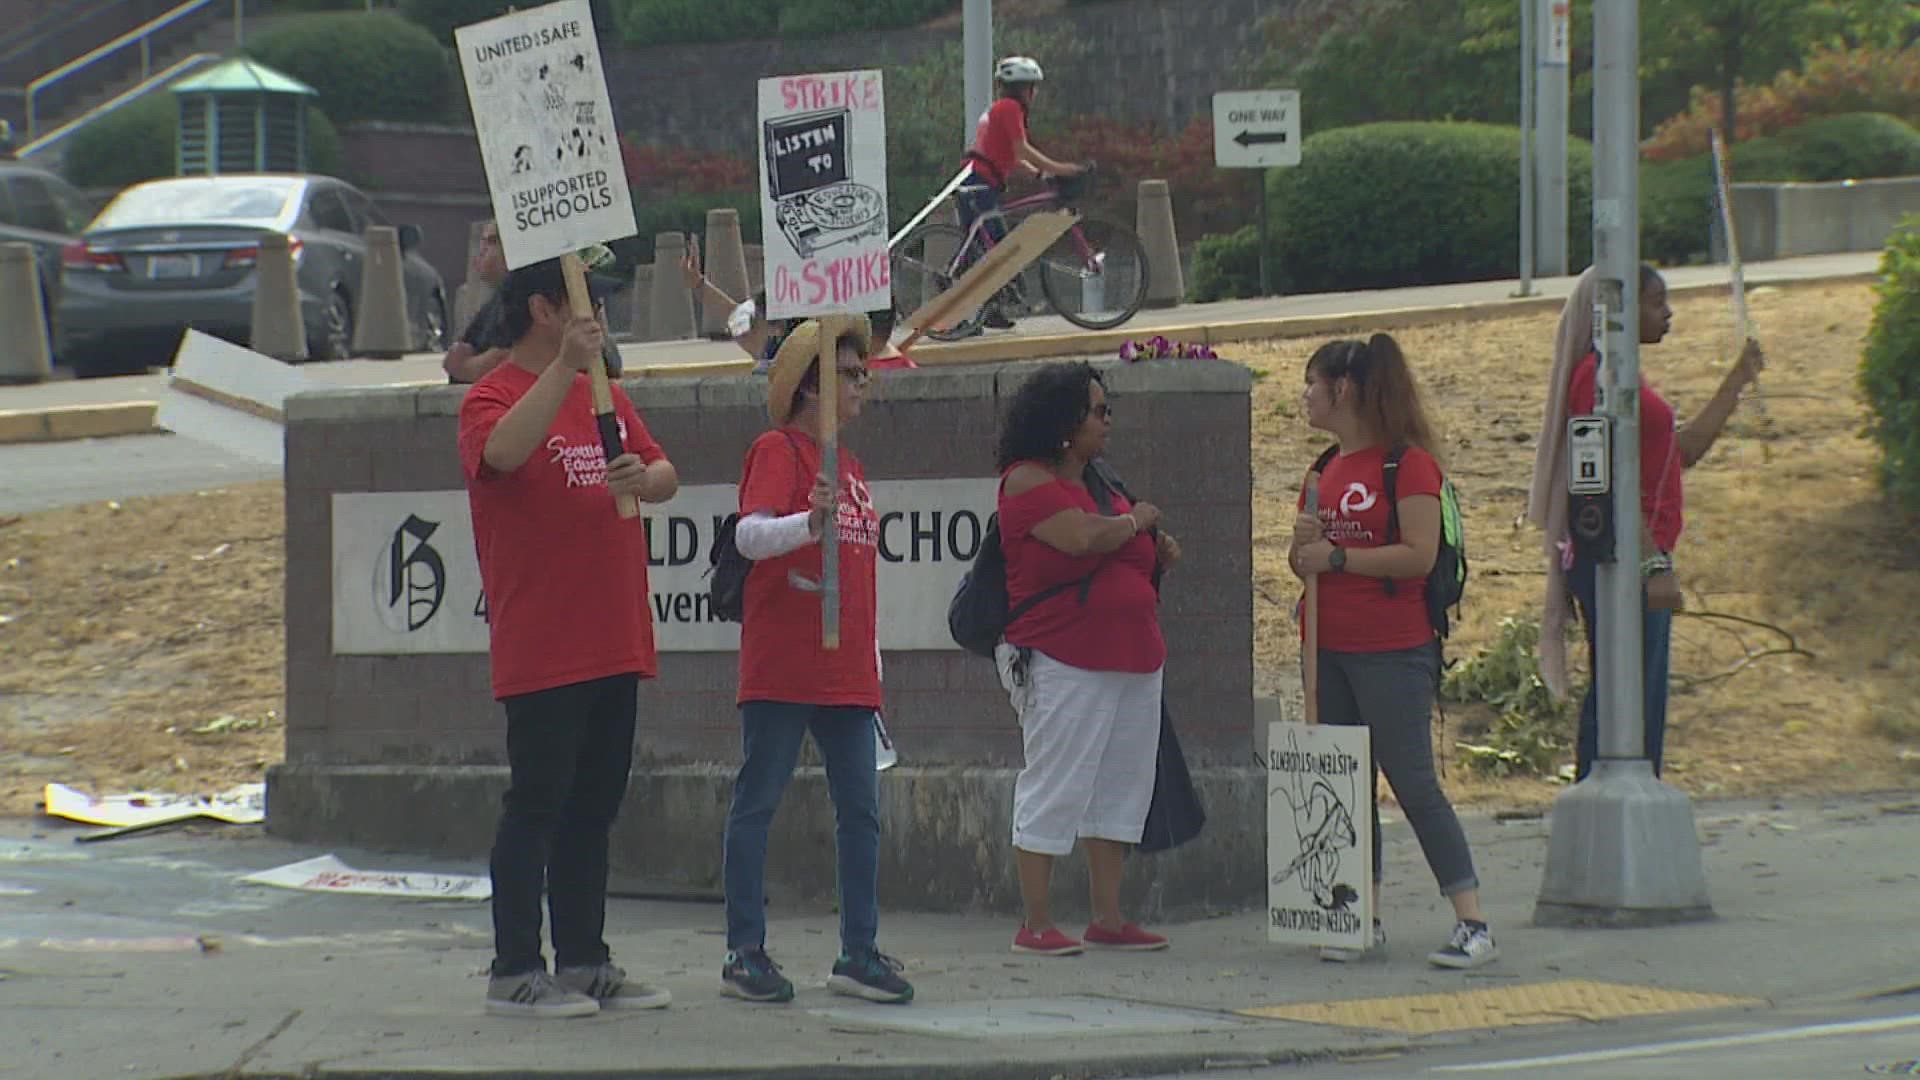 Seattle Public Schools said it reached a tentative agreement with the union for teachers who went on strike last week over issues like pay and classroom support.